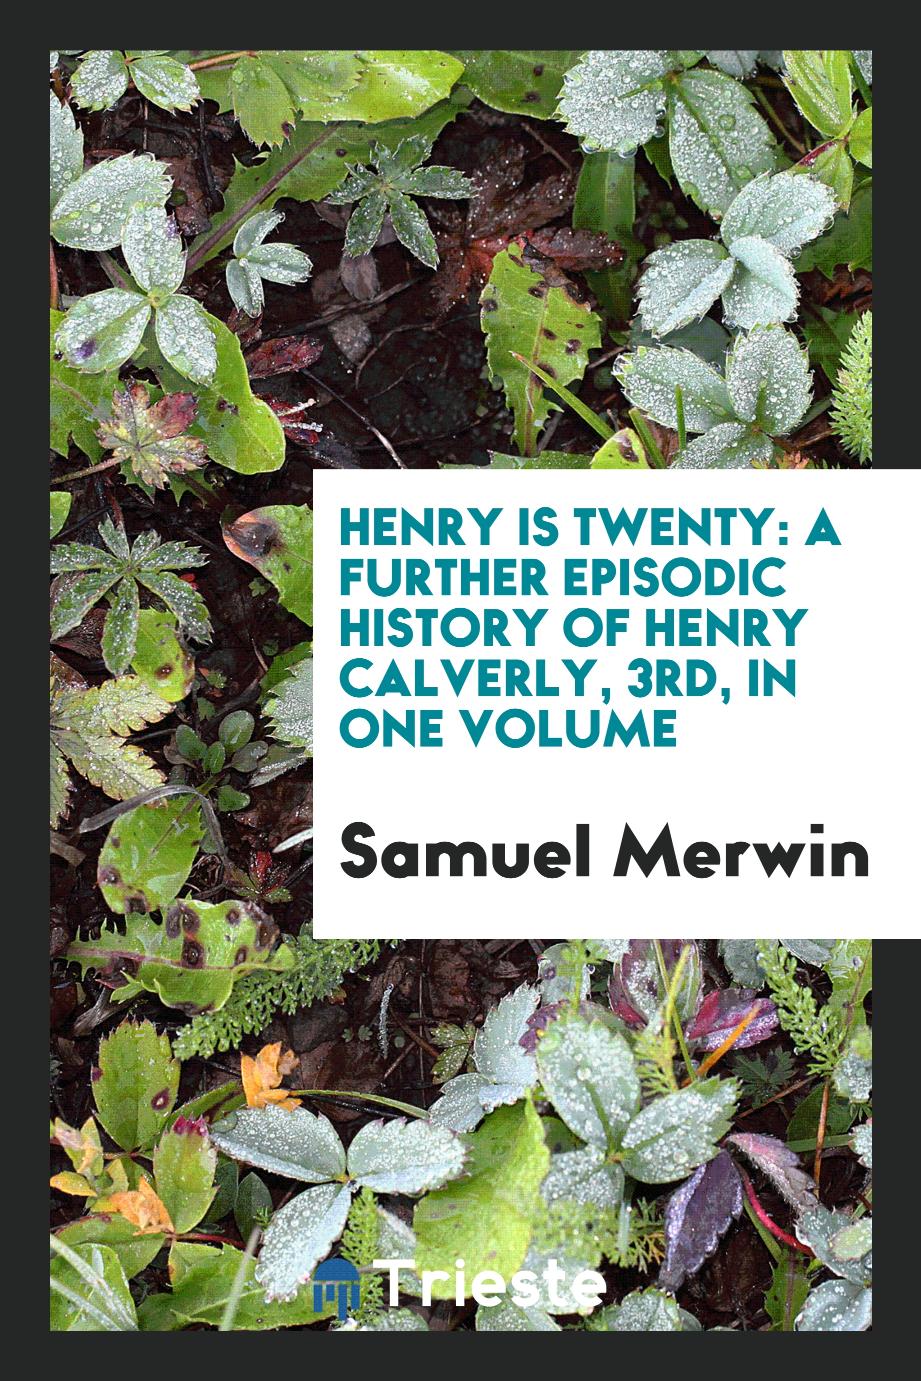 Henry is twenty: a further episodic history of Henry Calverly, 3rd, in one volume